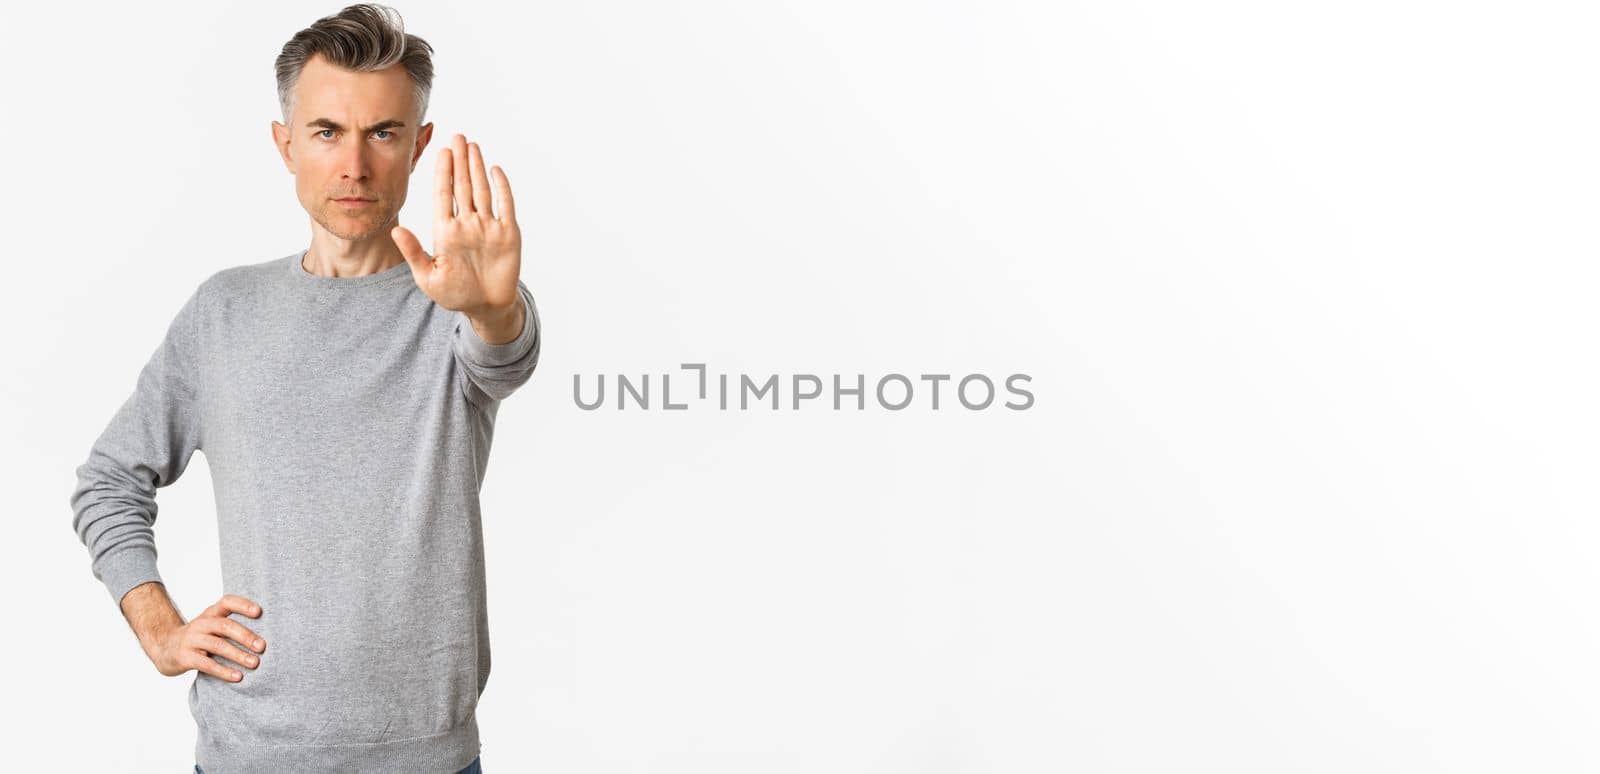 Image of serious middle-aged man extend one hand to stop you, prohibit something bad, frowning and looking with disapproval, standing over white background.